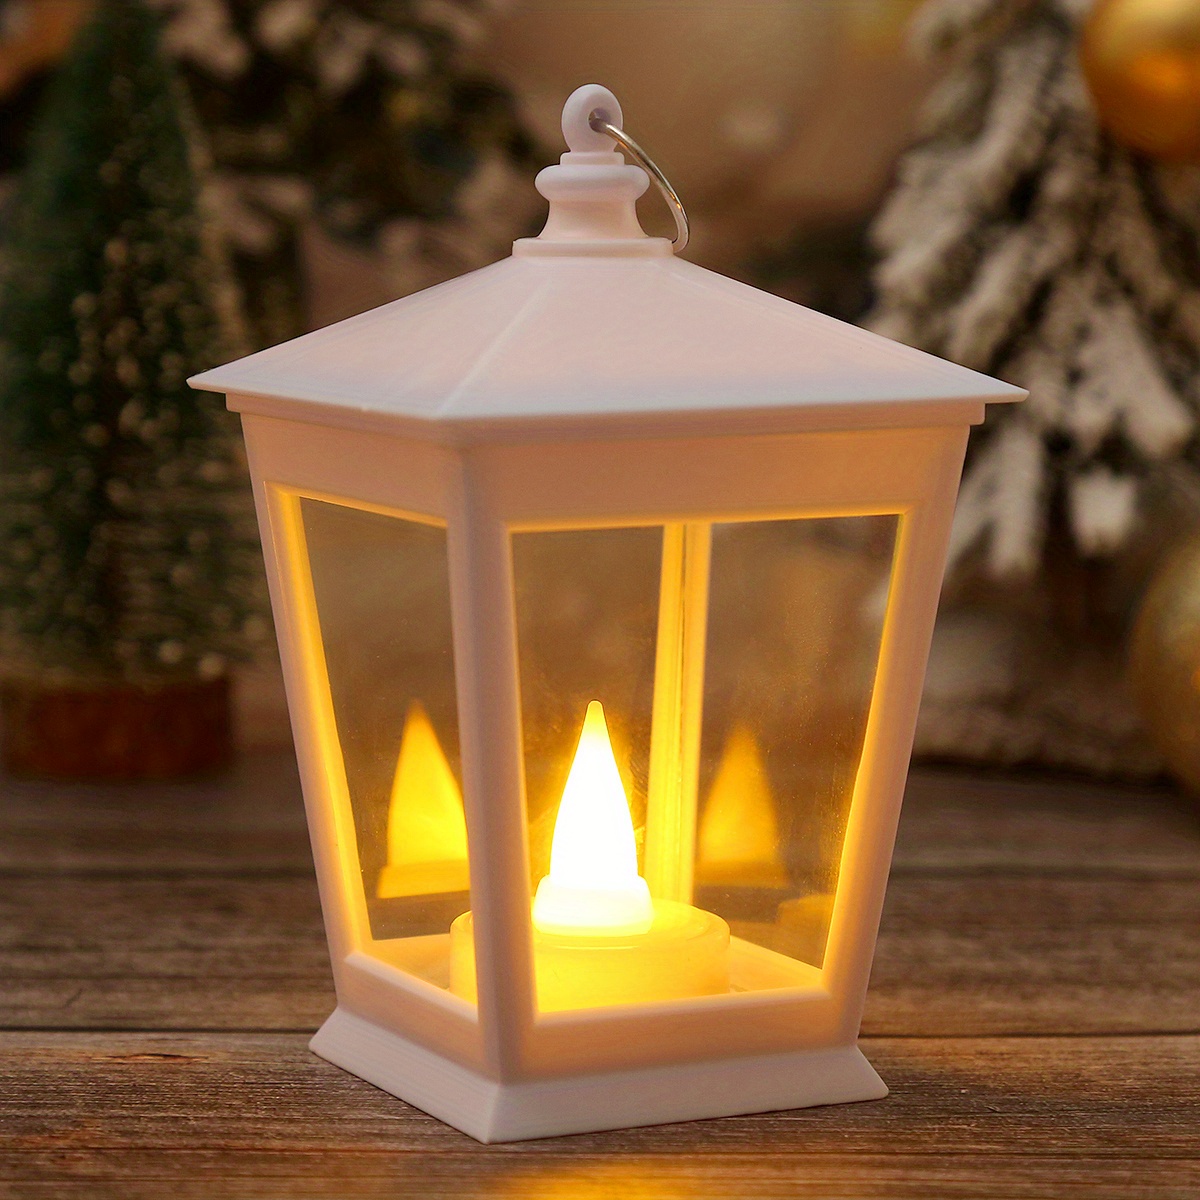 Travelwant Halloween Lantern,Mini Lantern Decorative Lights with Flickering  Candles,Vintage Glass Hanging LED Small Candle Lanterns Gifts for